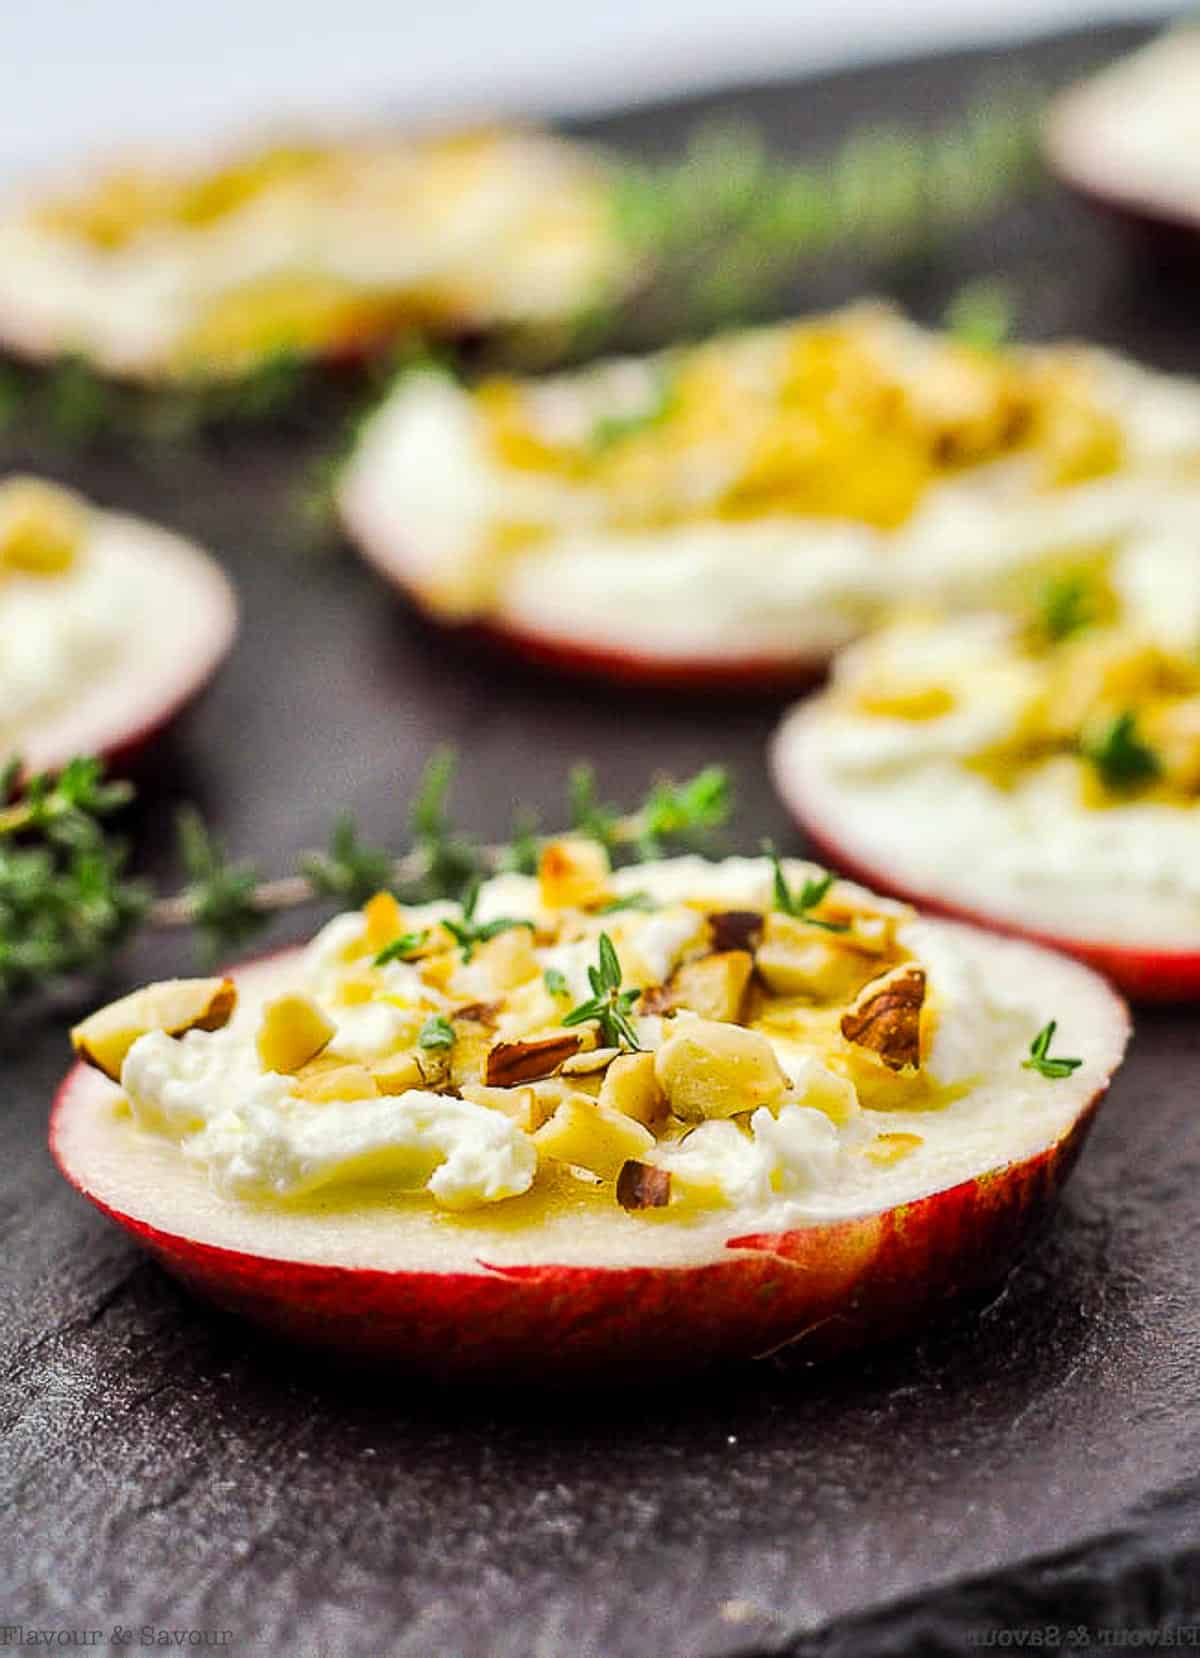 an apple slice topped with whipped feta cheese, chopped hazelnuts and honey.